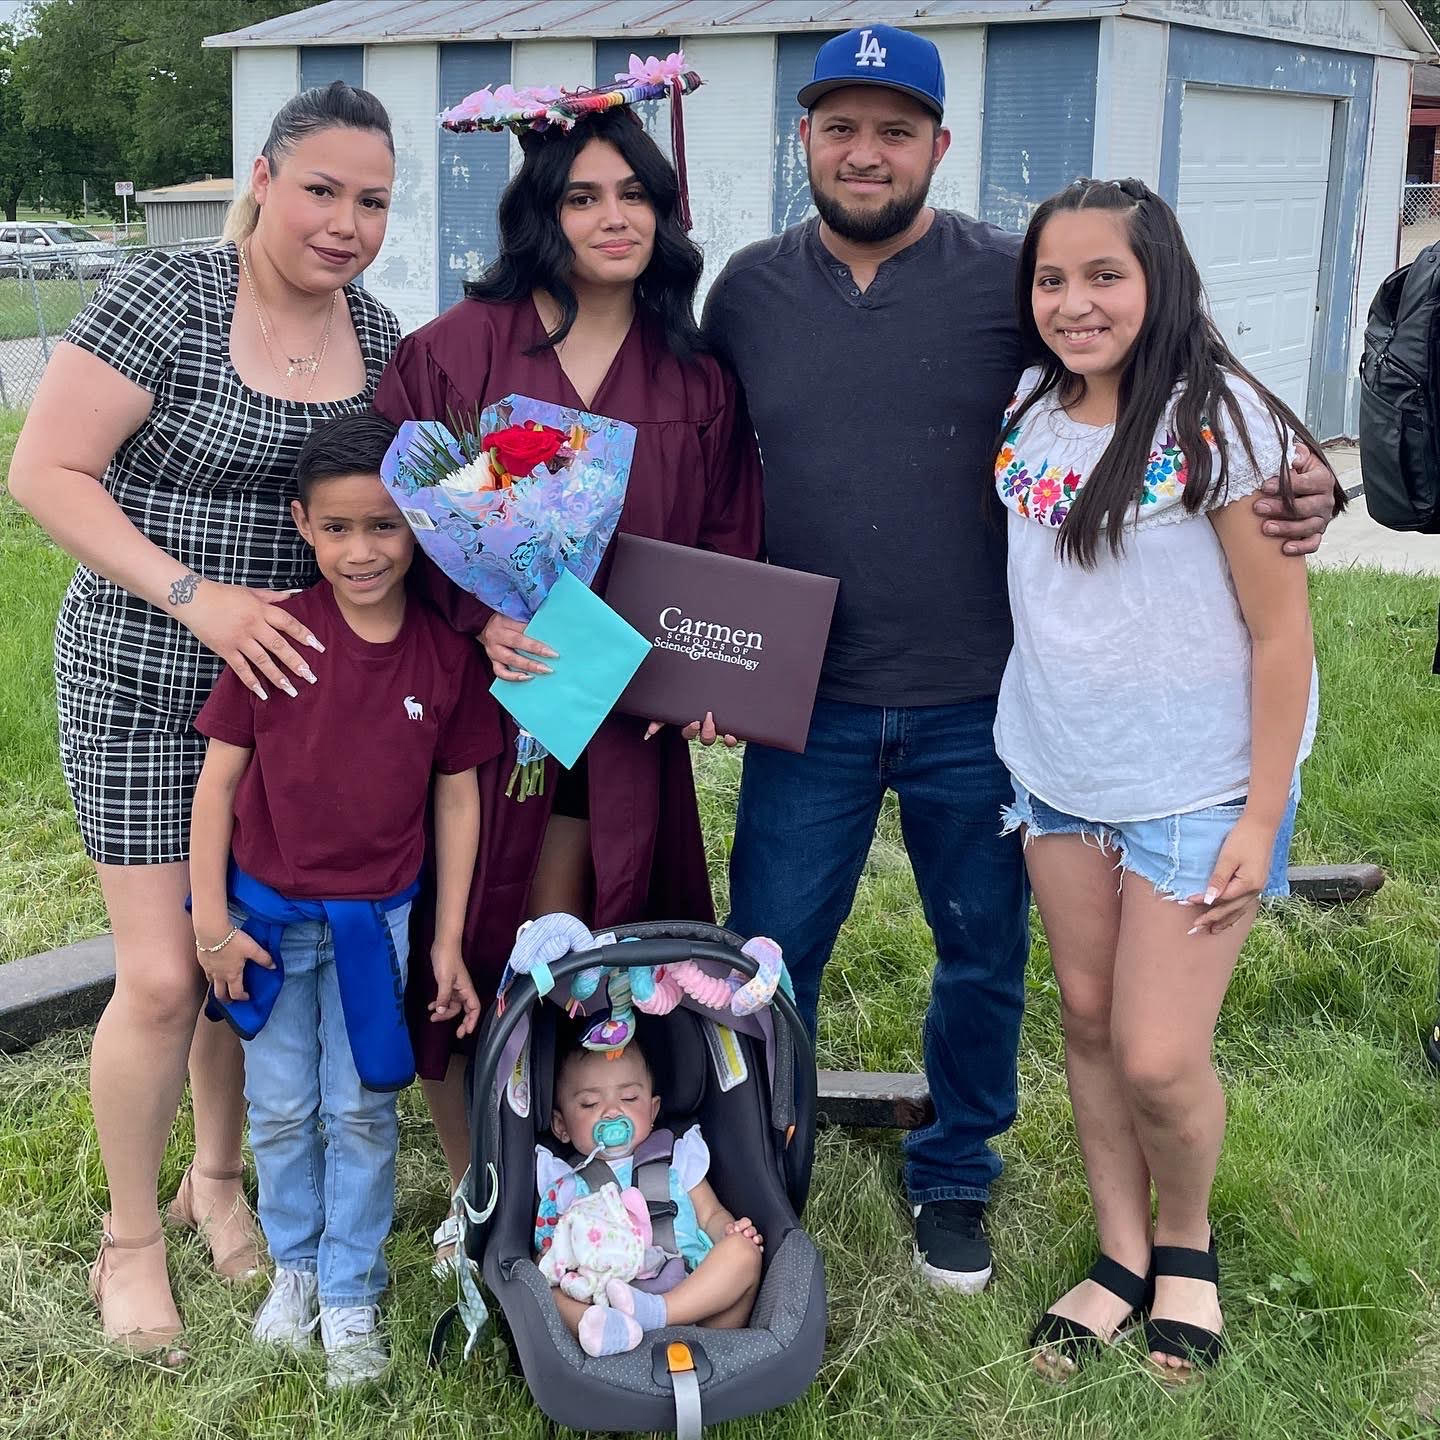 Diana Rico poses for a photo alongside her family while standing in a grassy field, with a garage, fencing and trees in the background.